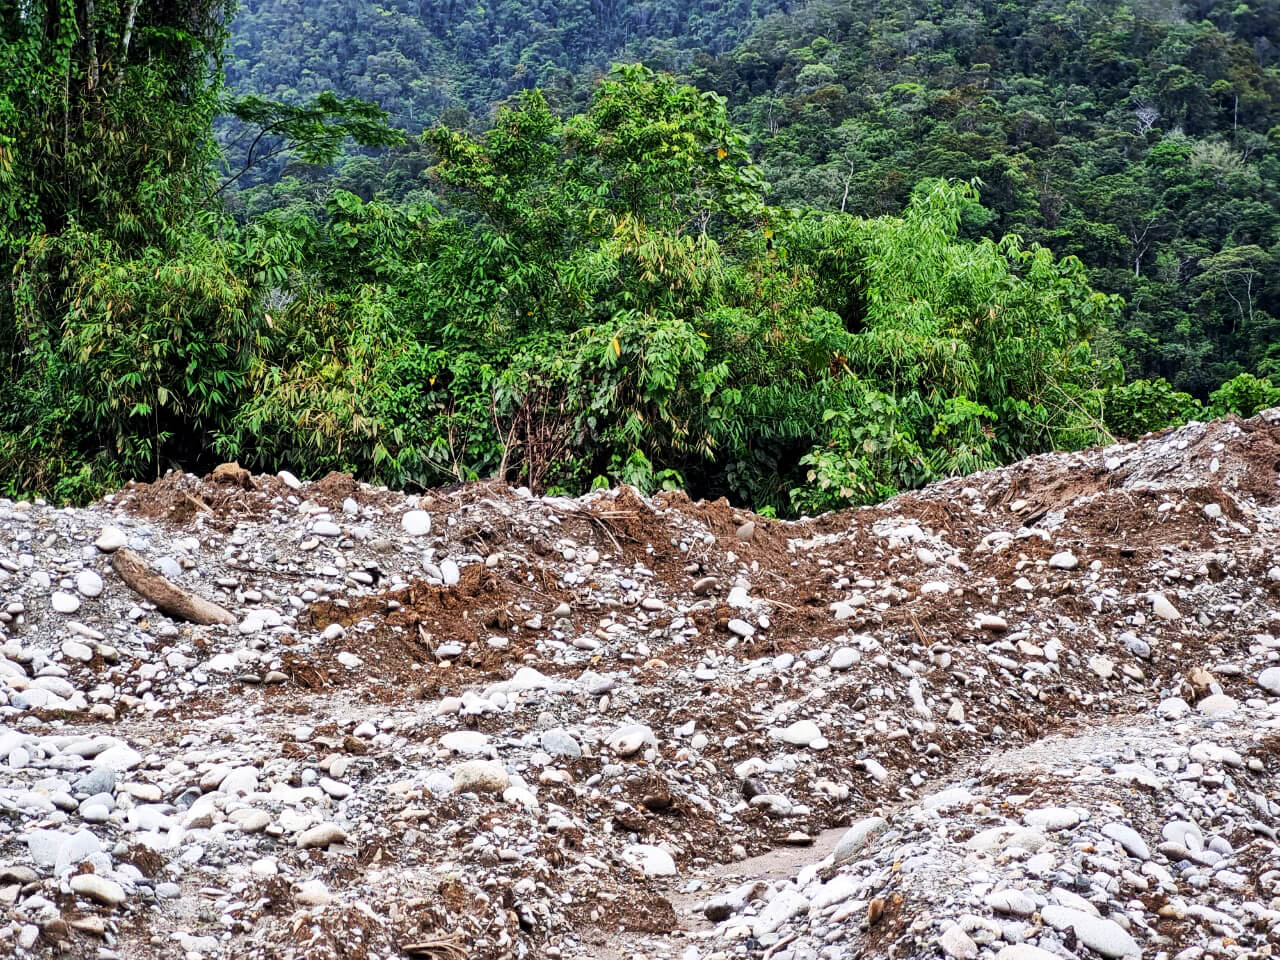 Can “green gold” revive Ecuador’s land degraded by gold mining?